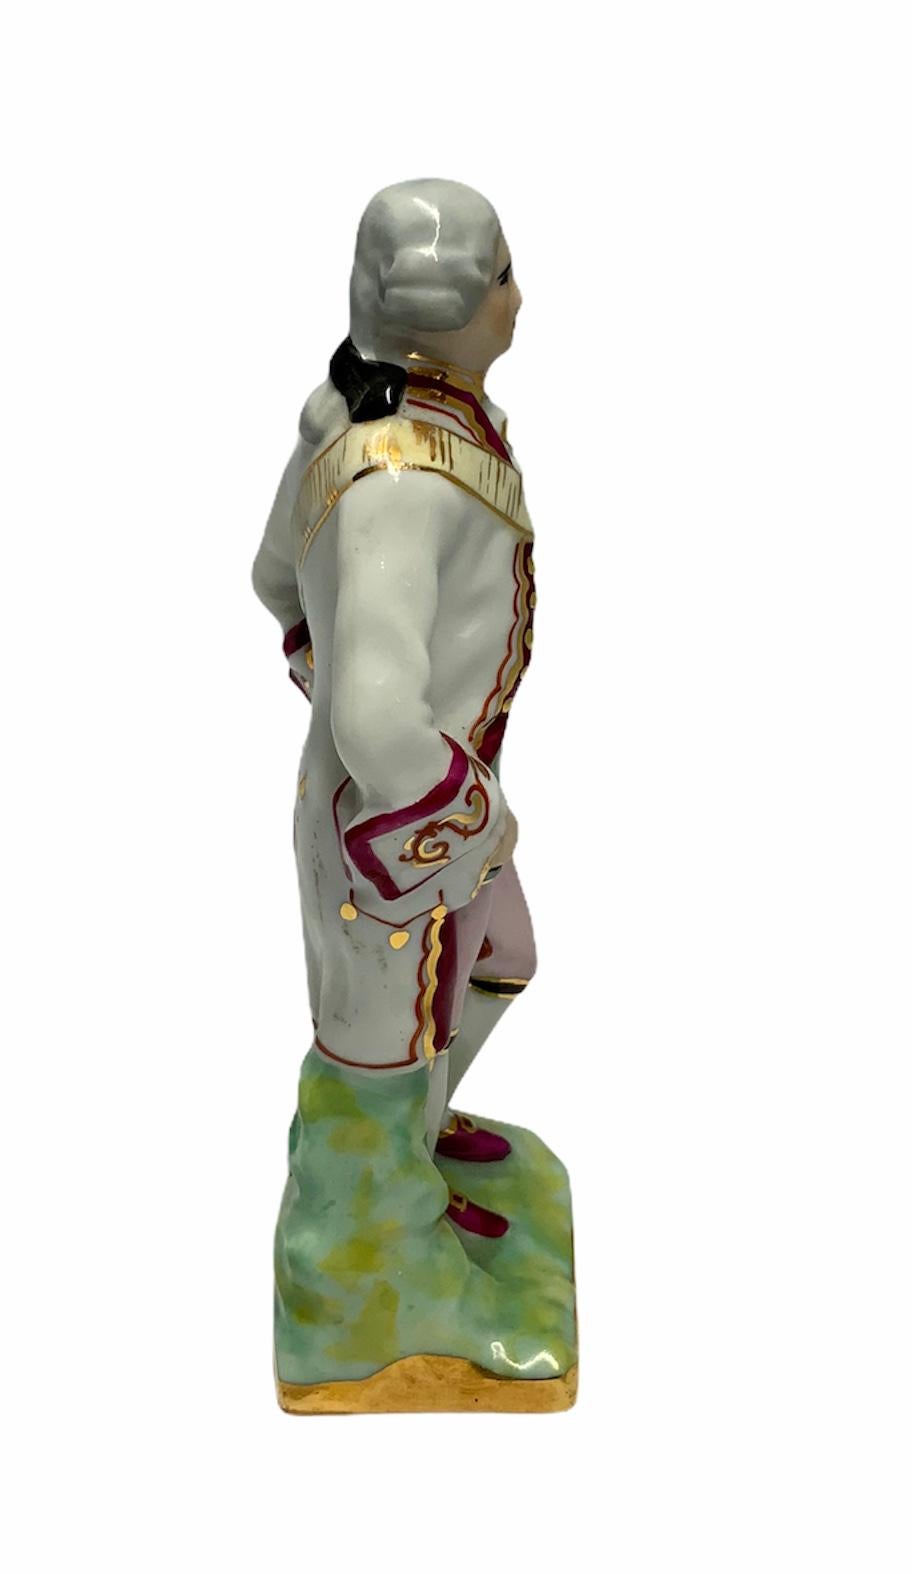 This a small Limoges porcelain depicting a man with an 18th century gentleman suit. He is standing in front of some green bushes. Under the base is the Limoges porcelain hallmark.